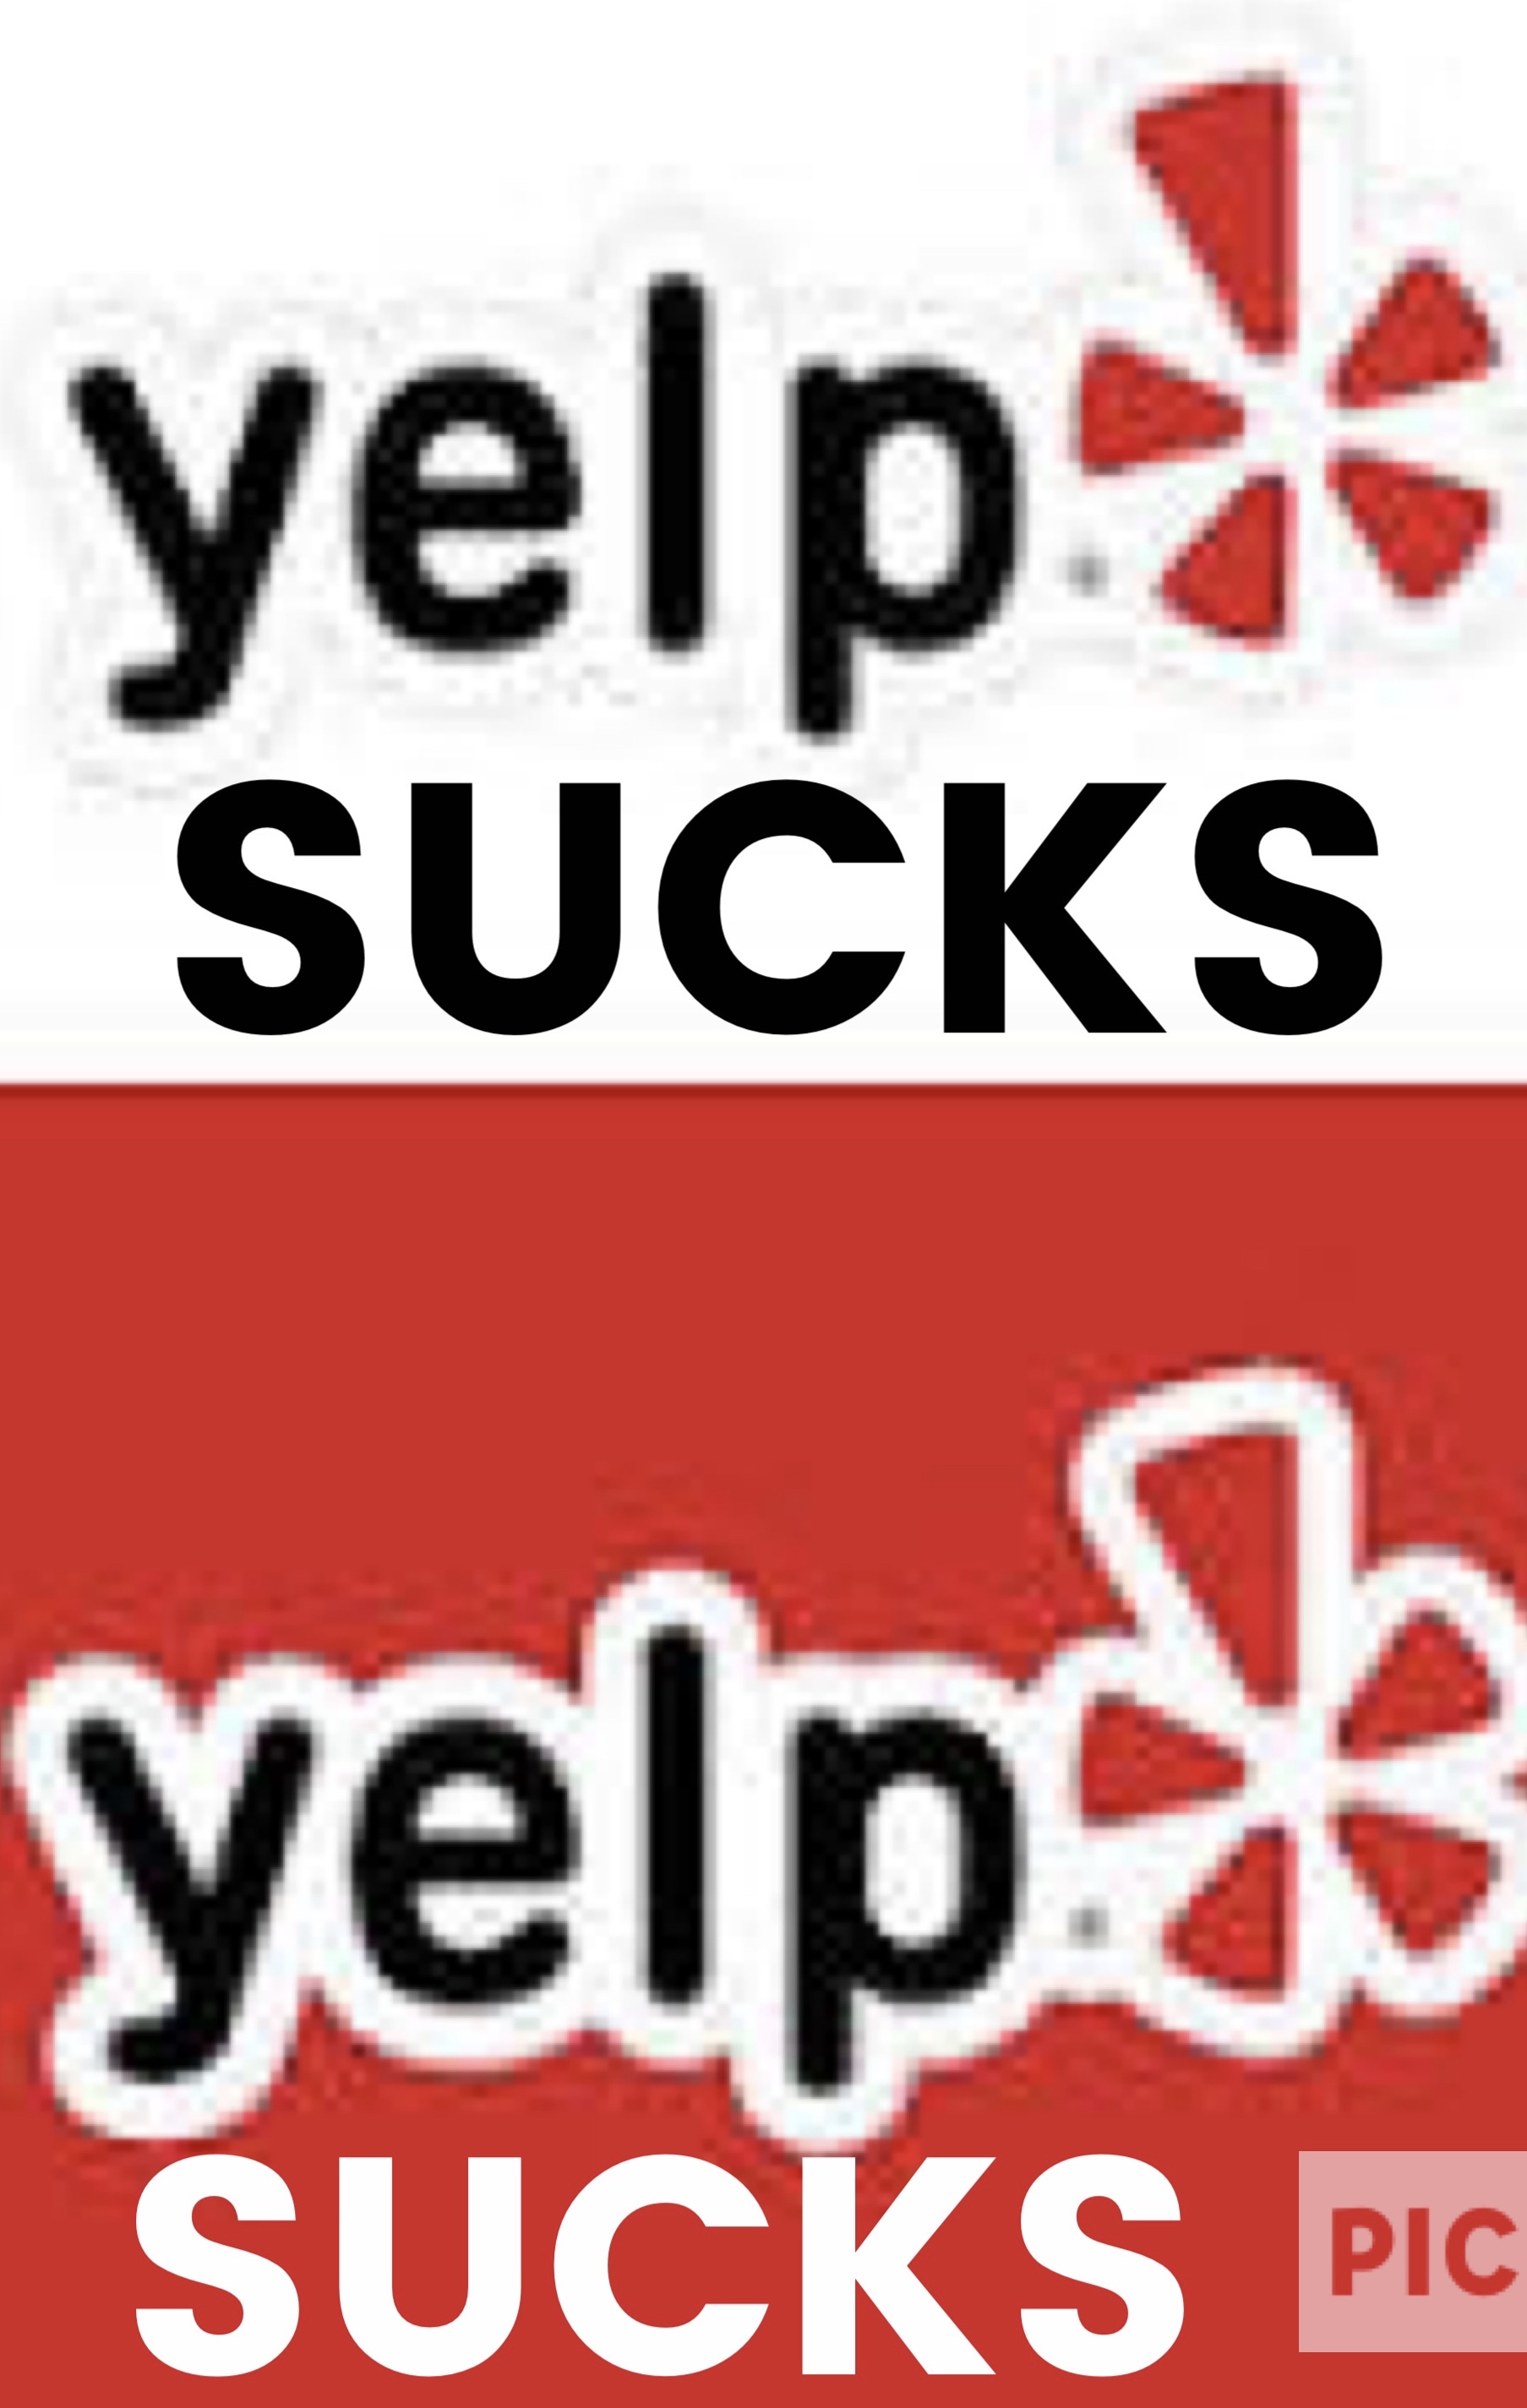 yelp reviewer